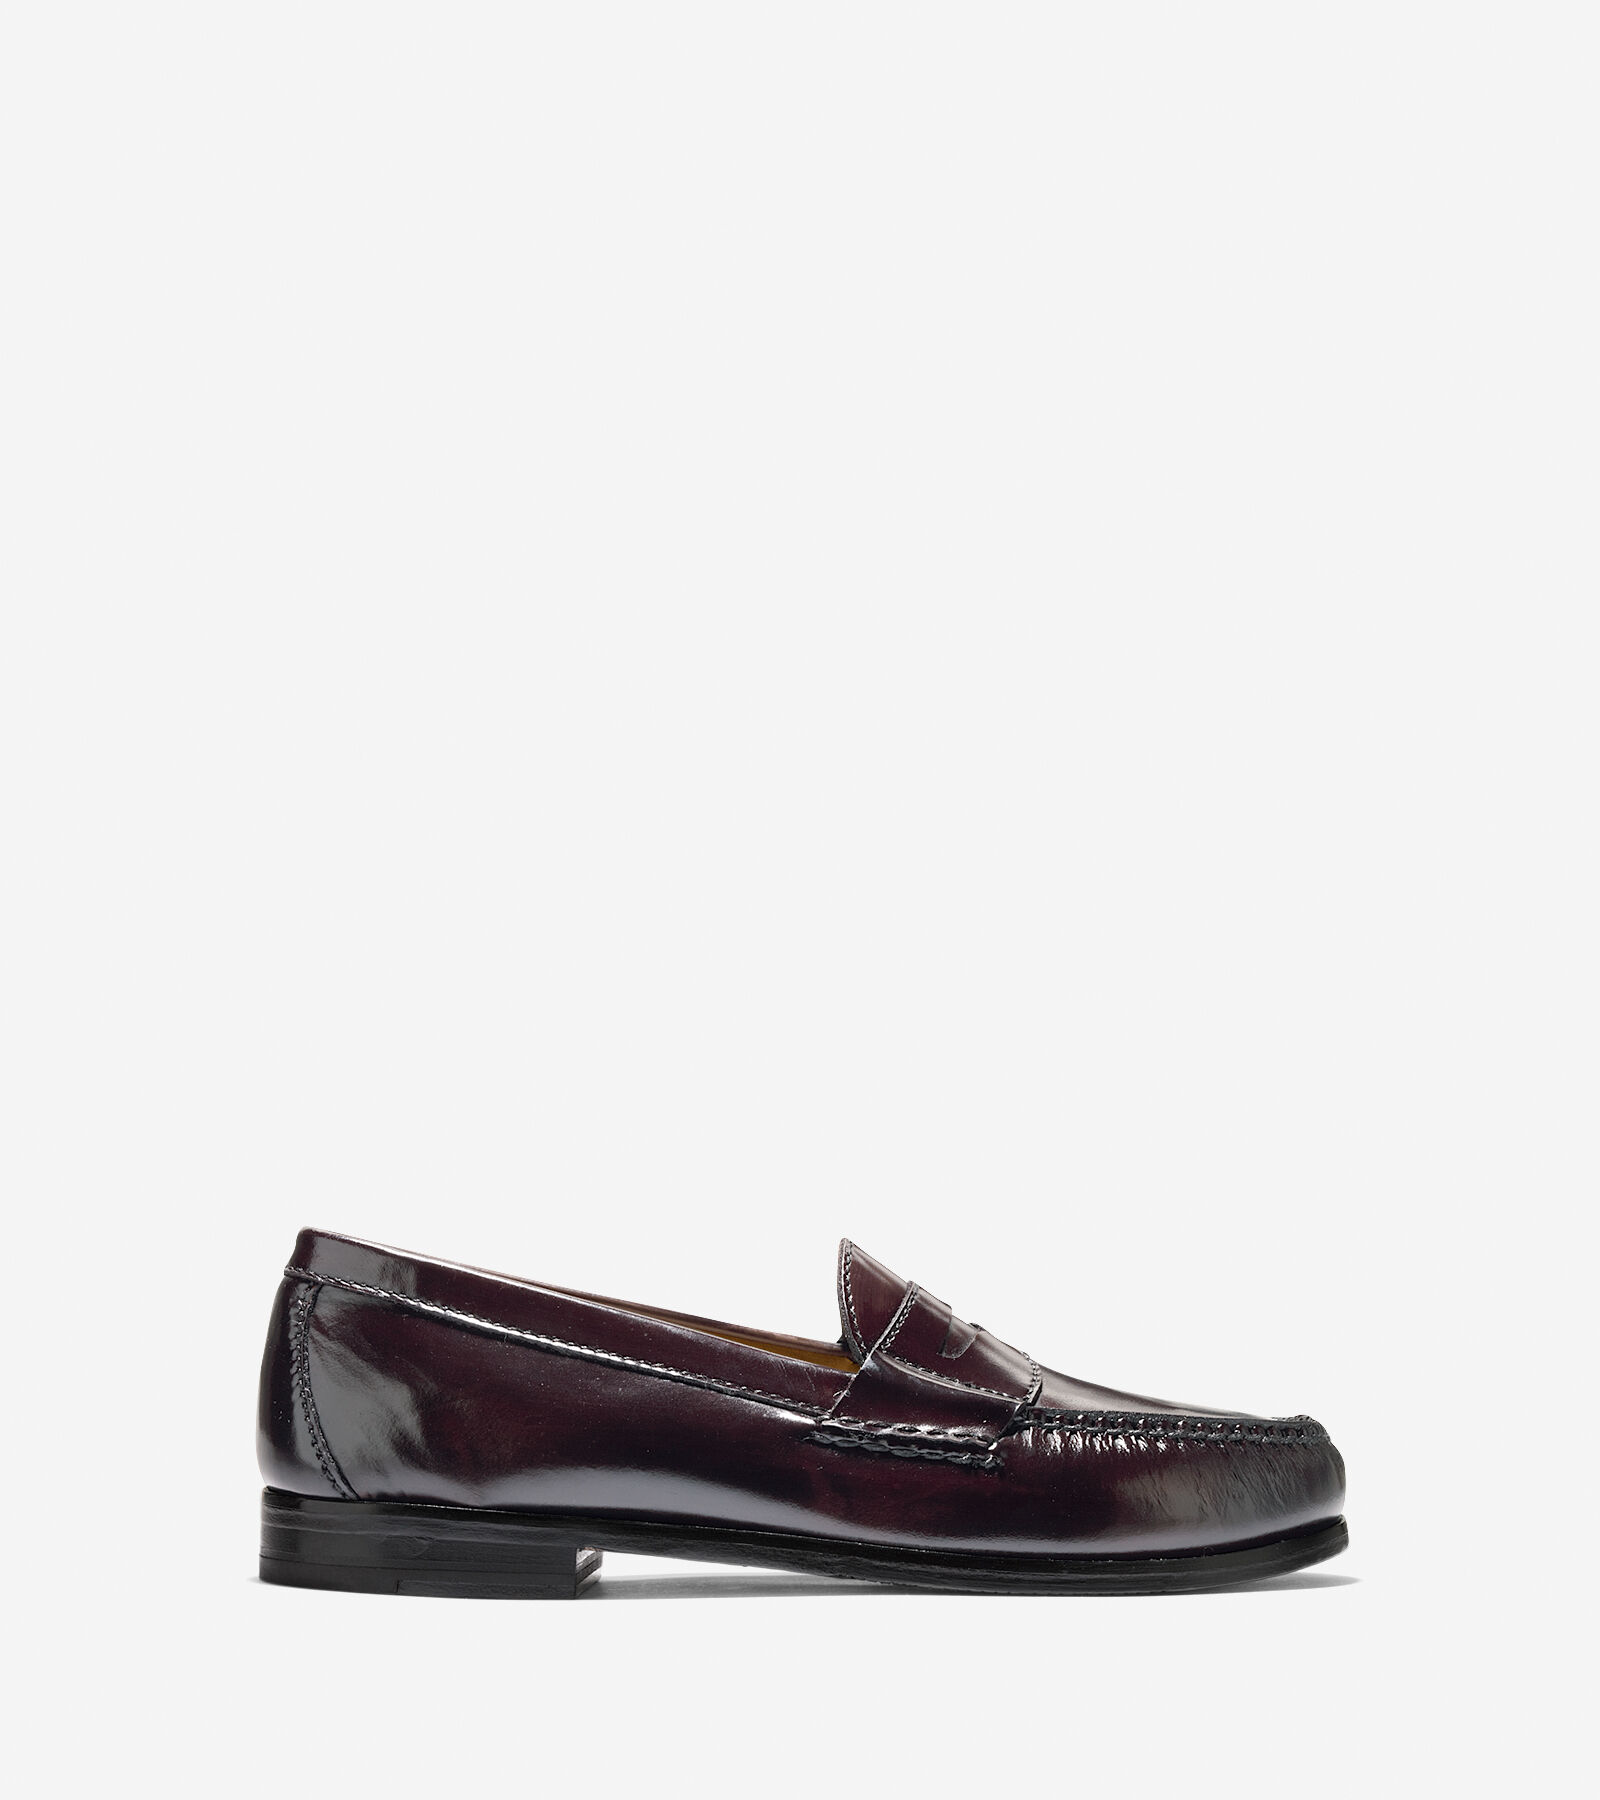 Pinch Grand Penny Loafer in Mahogany 